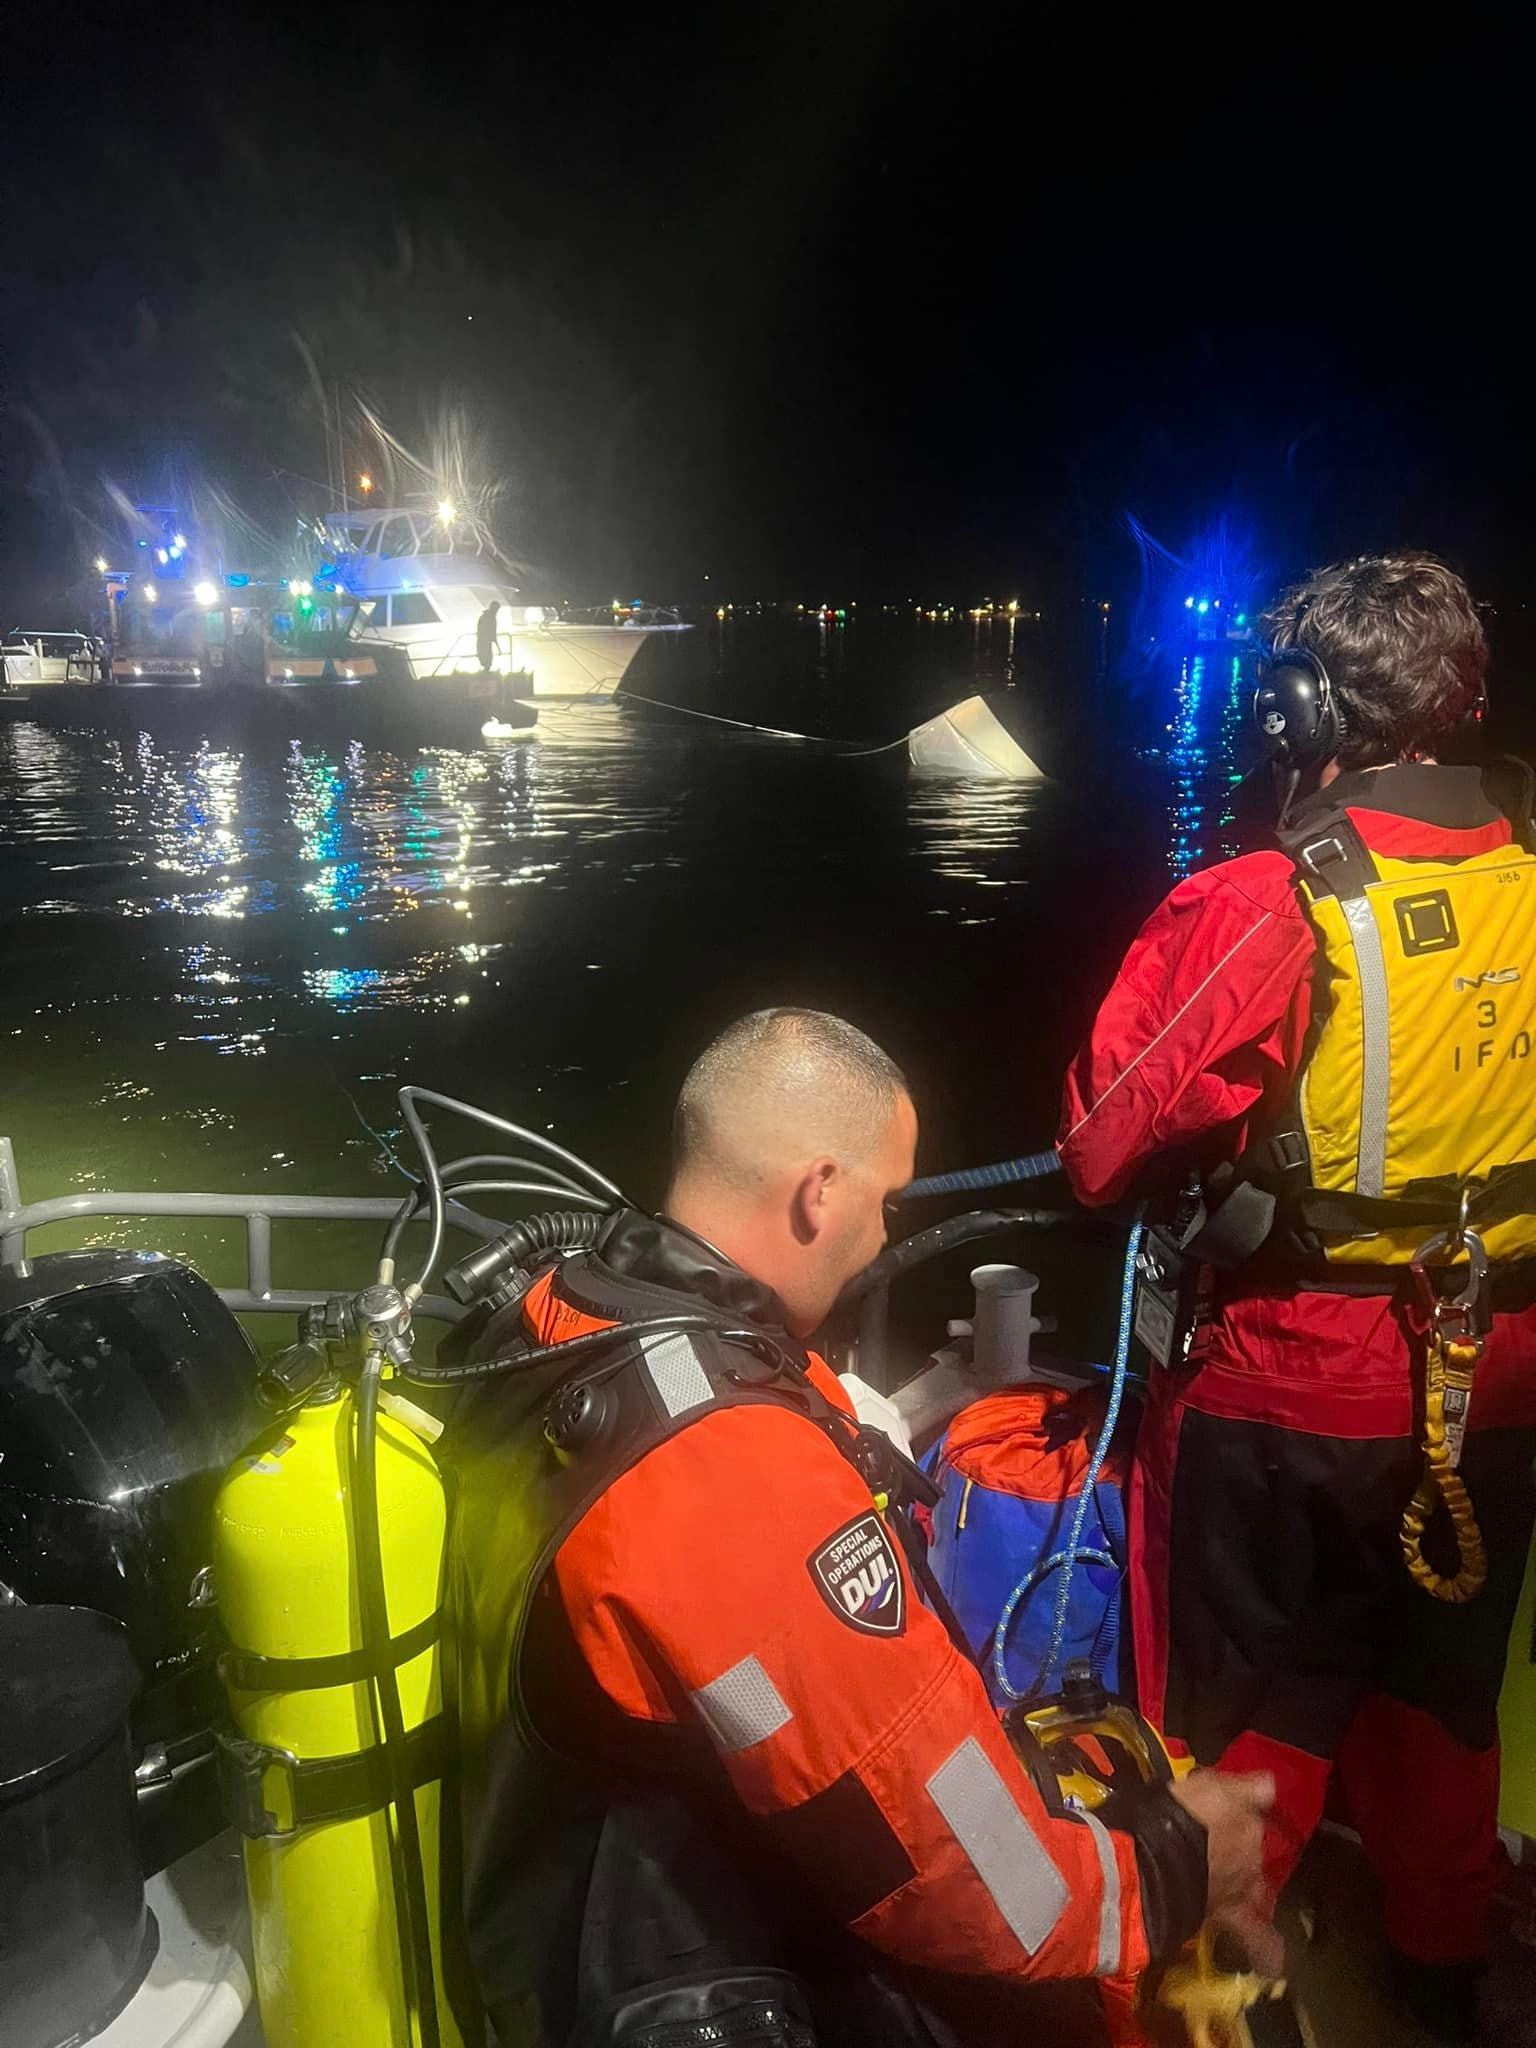 Islip Fire Department tries to retrieve victims of capsized boat off of Long Island